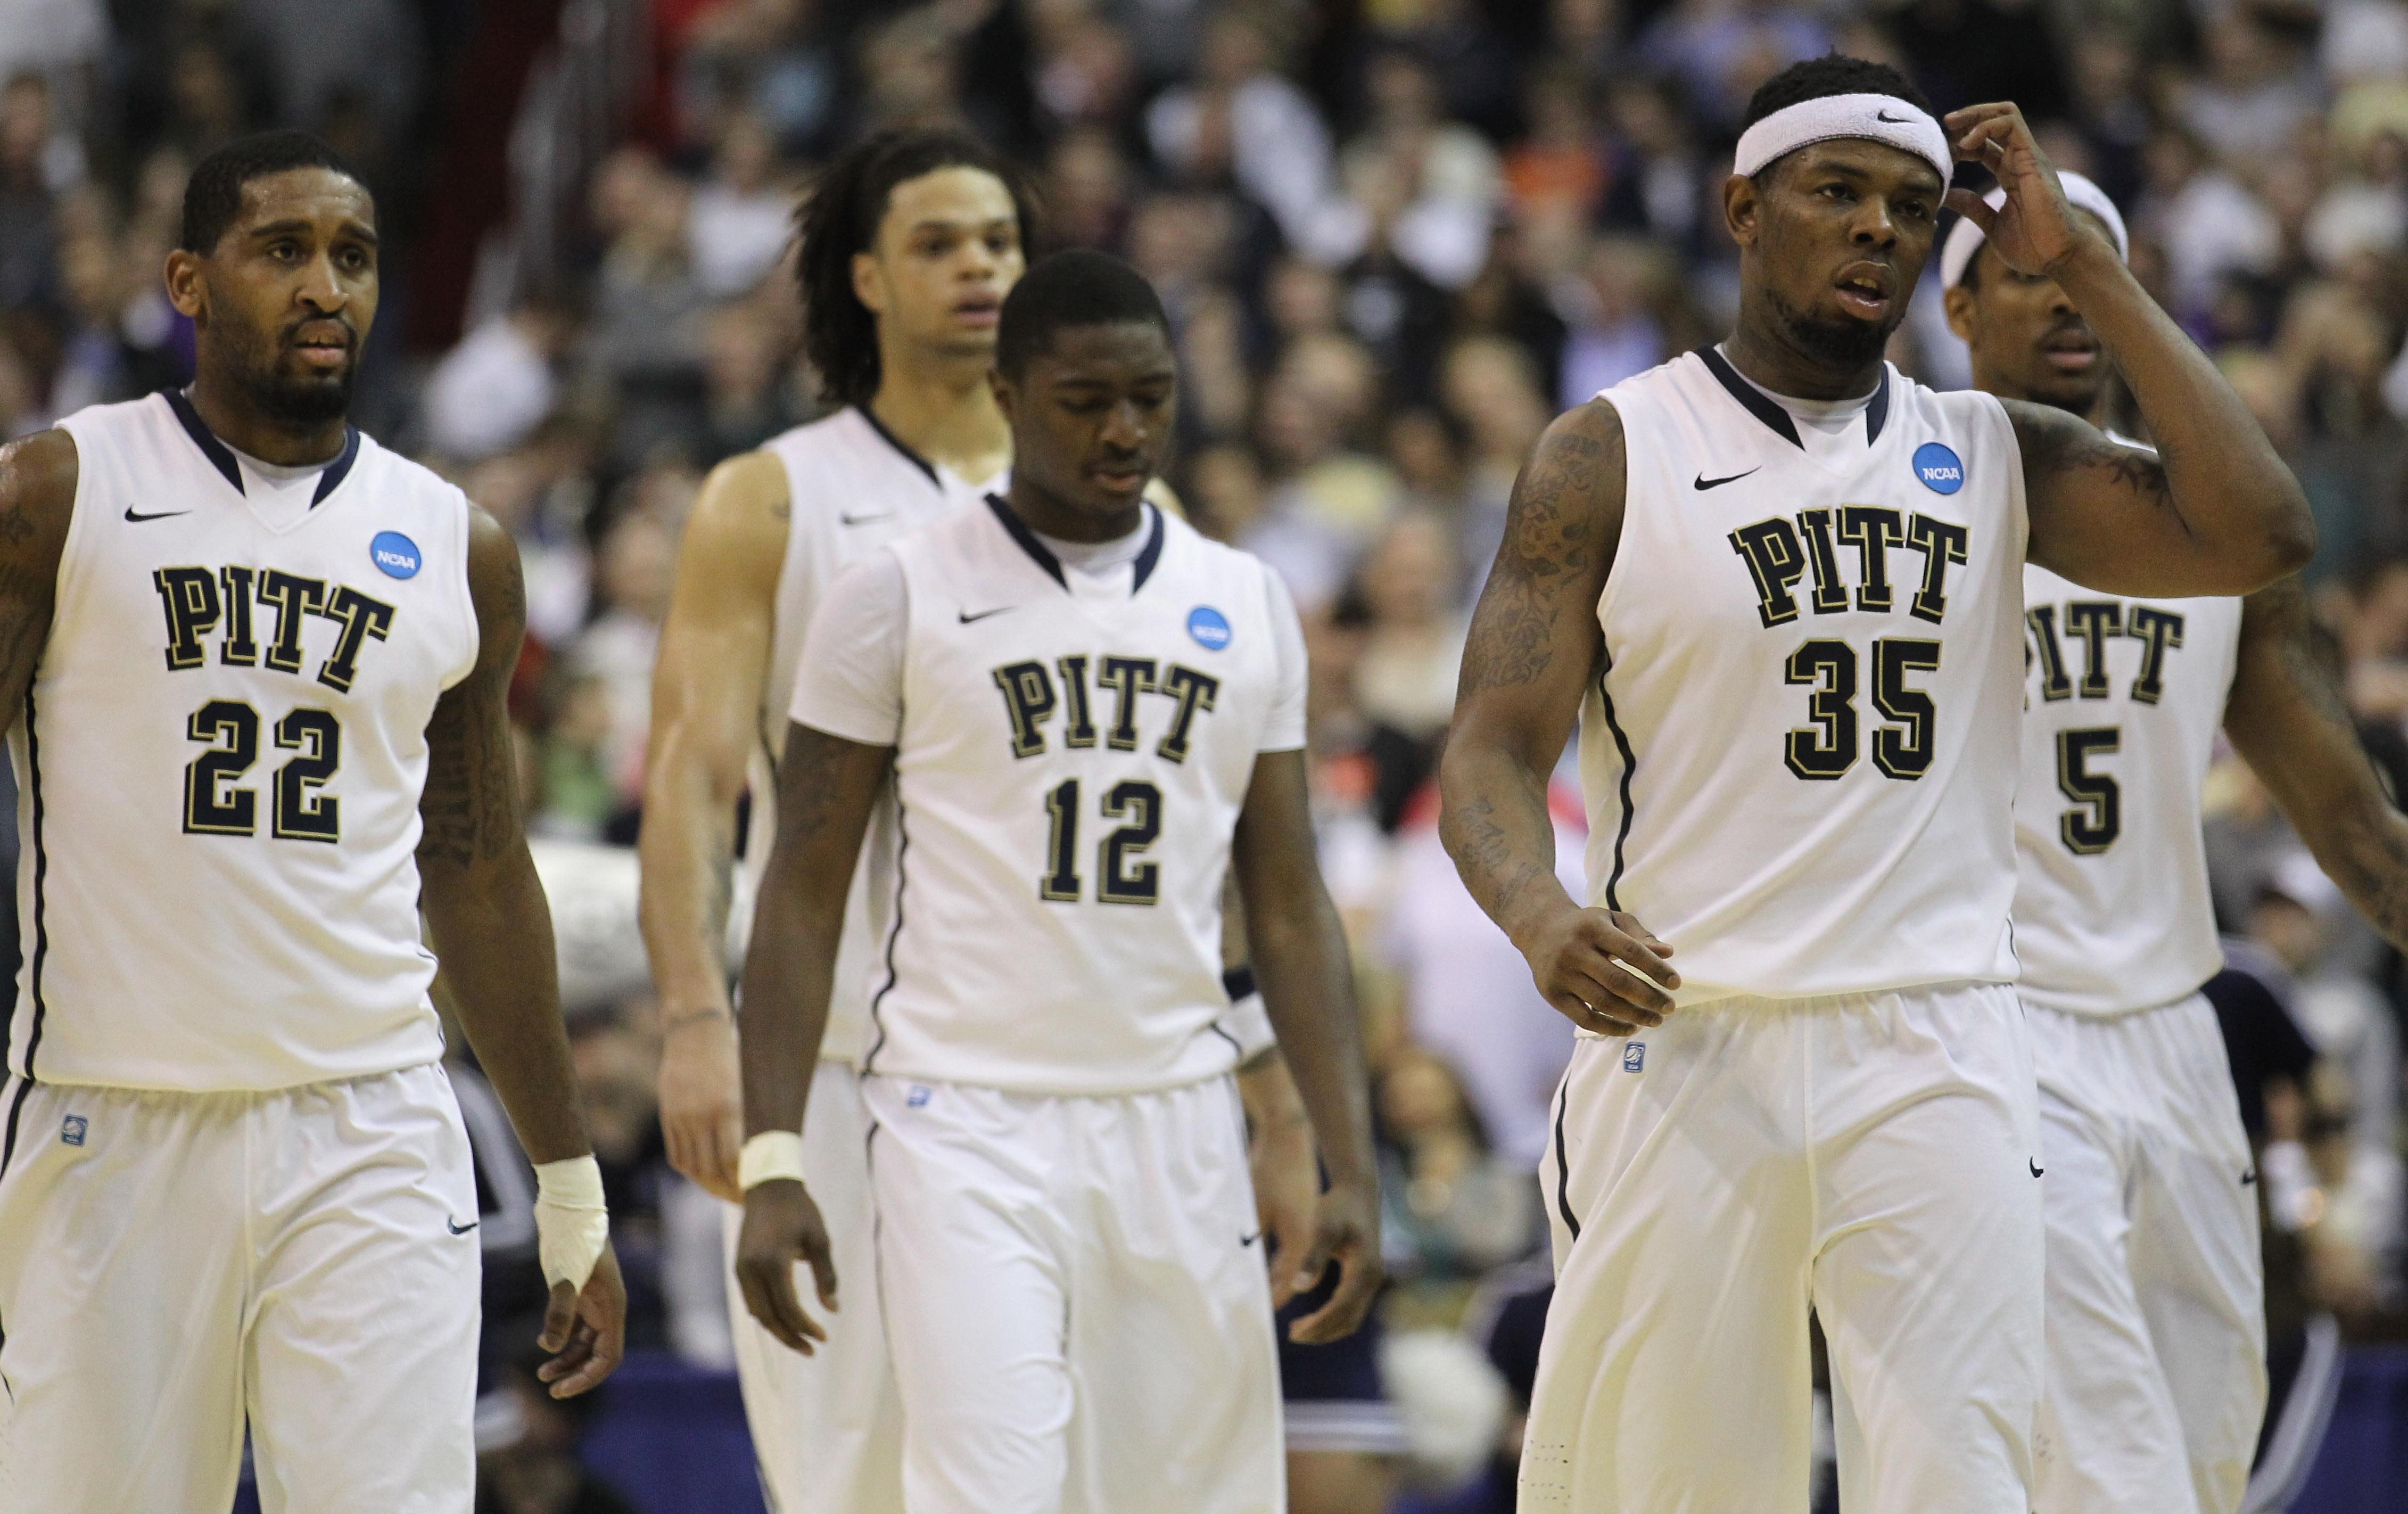 WASHINGTON - MARCH 19:  Members of the Pittsburgh basketball team including Nasir Robinson #35, Ashton Gibbs #12; and Brad Wanamaker#22 walk off the court following their loss against Butler in the third round of the 2011 NCAA men's basketball tournament